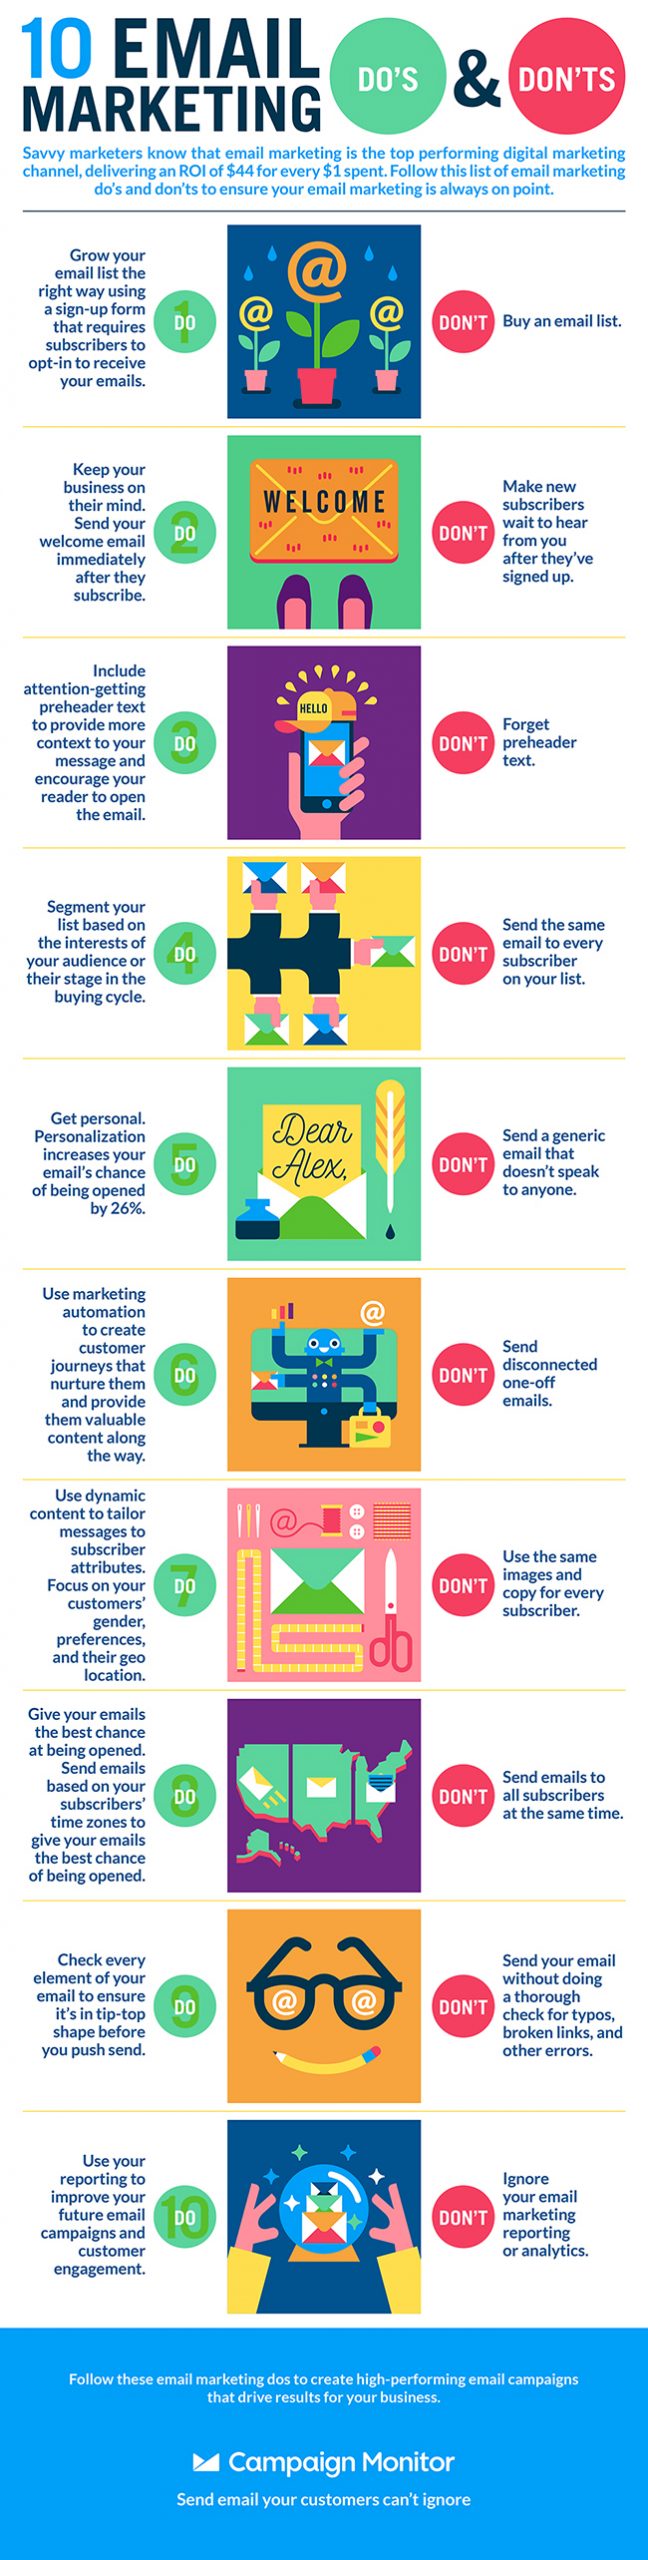 Infographic: 10 Email Marketing Dos and Don'ts